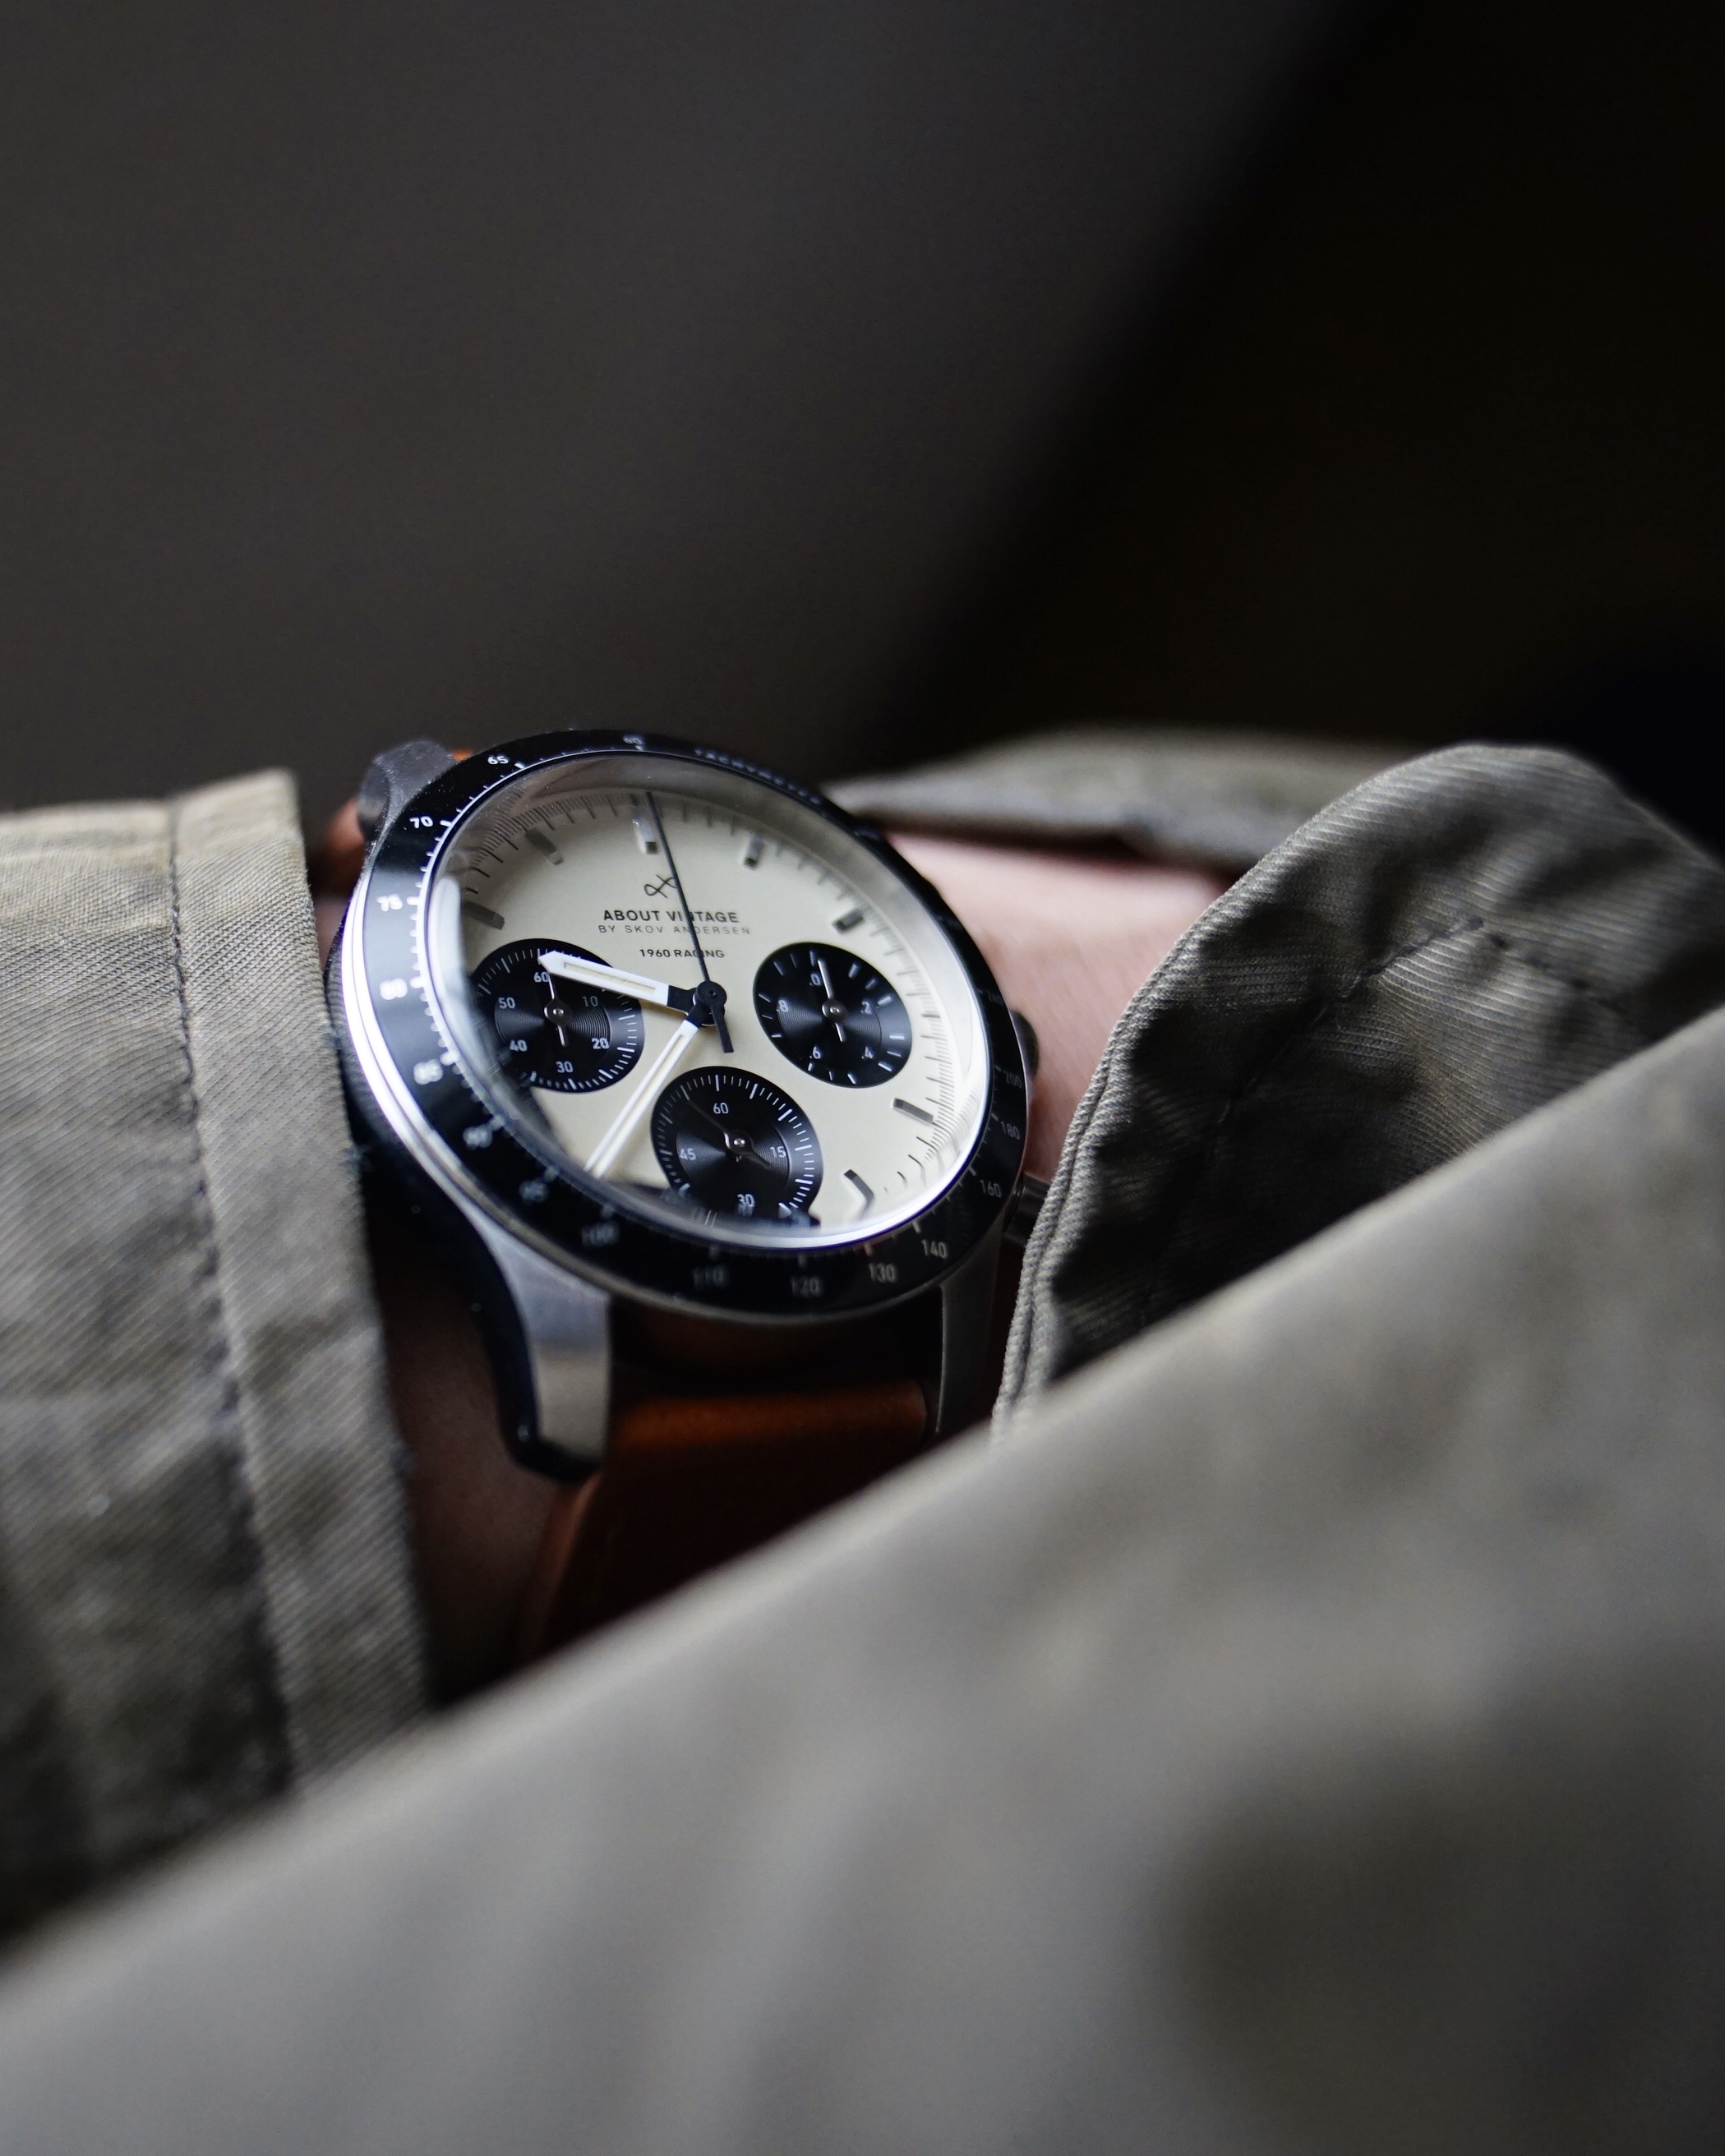 About Vintage 『1960』RACING CHRONOGRAPH 着用イメージ写真　3